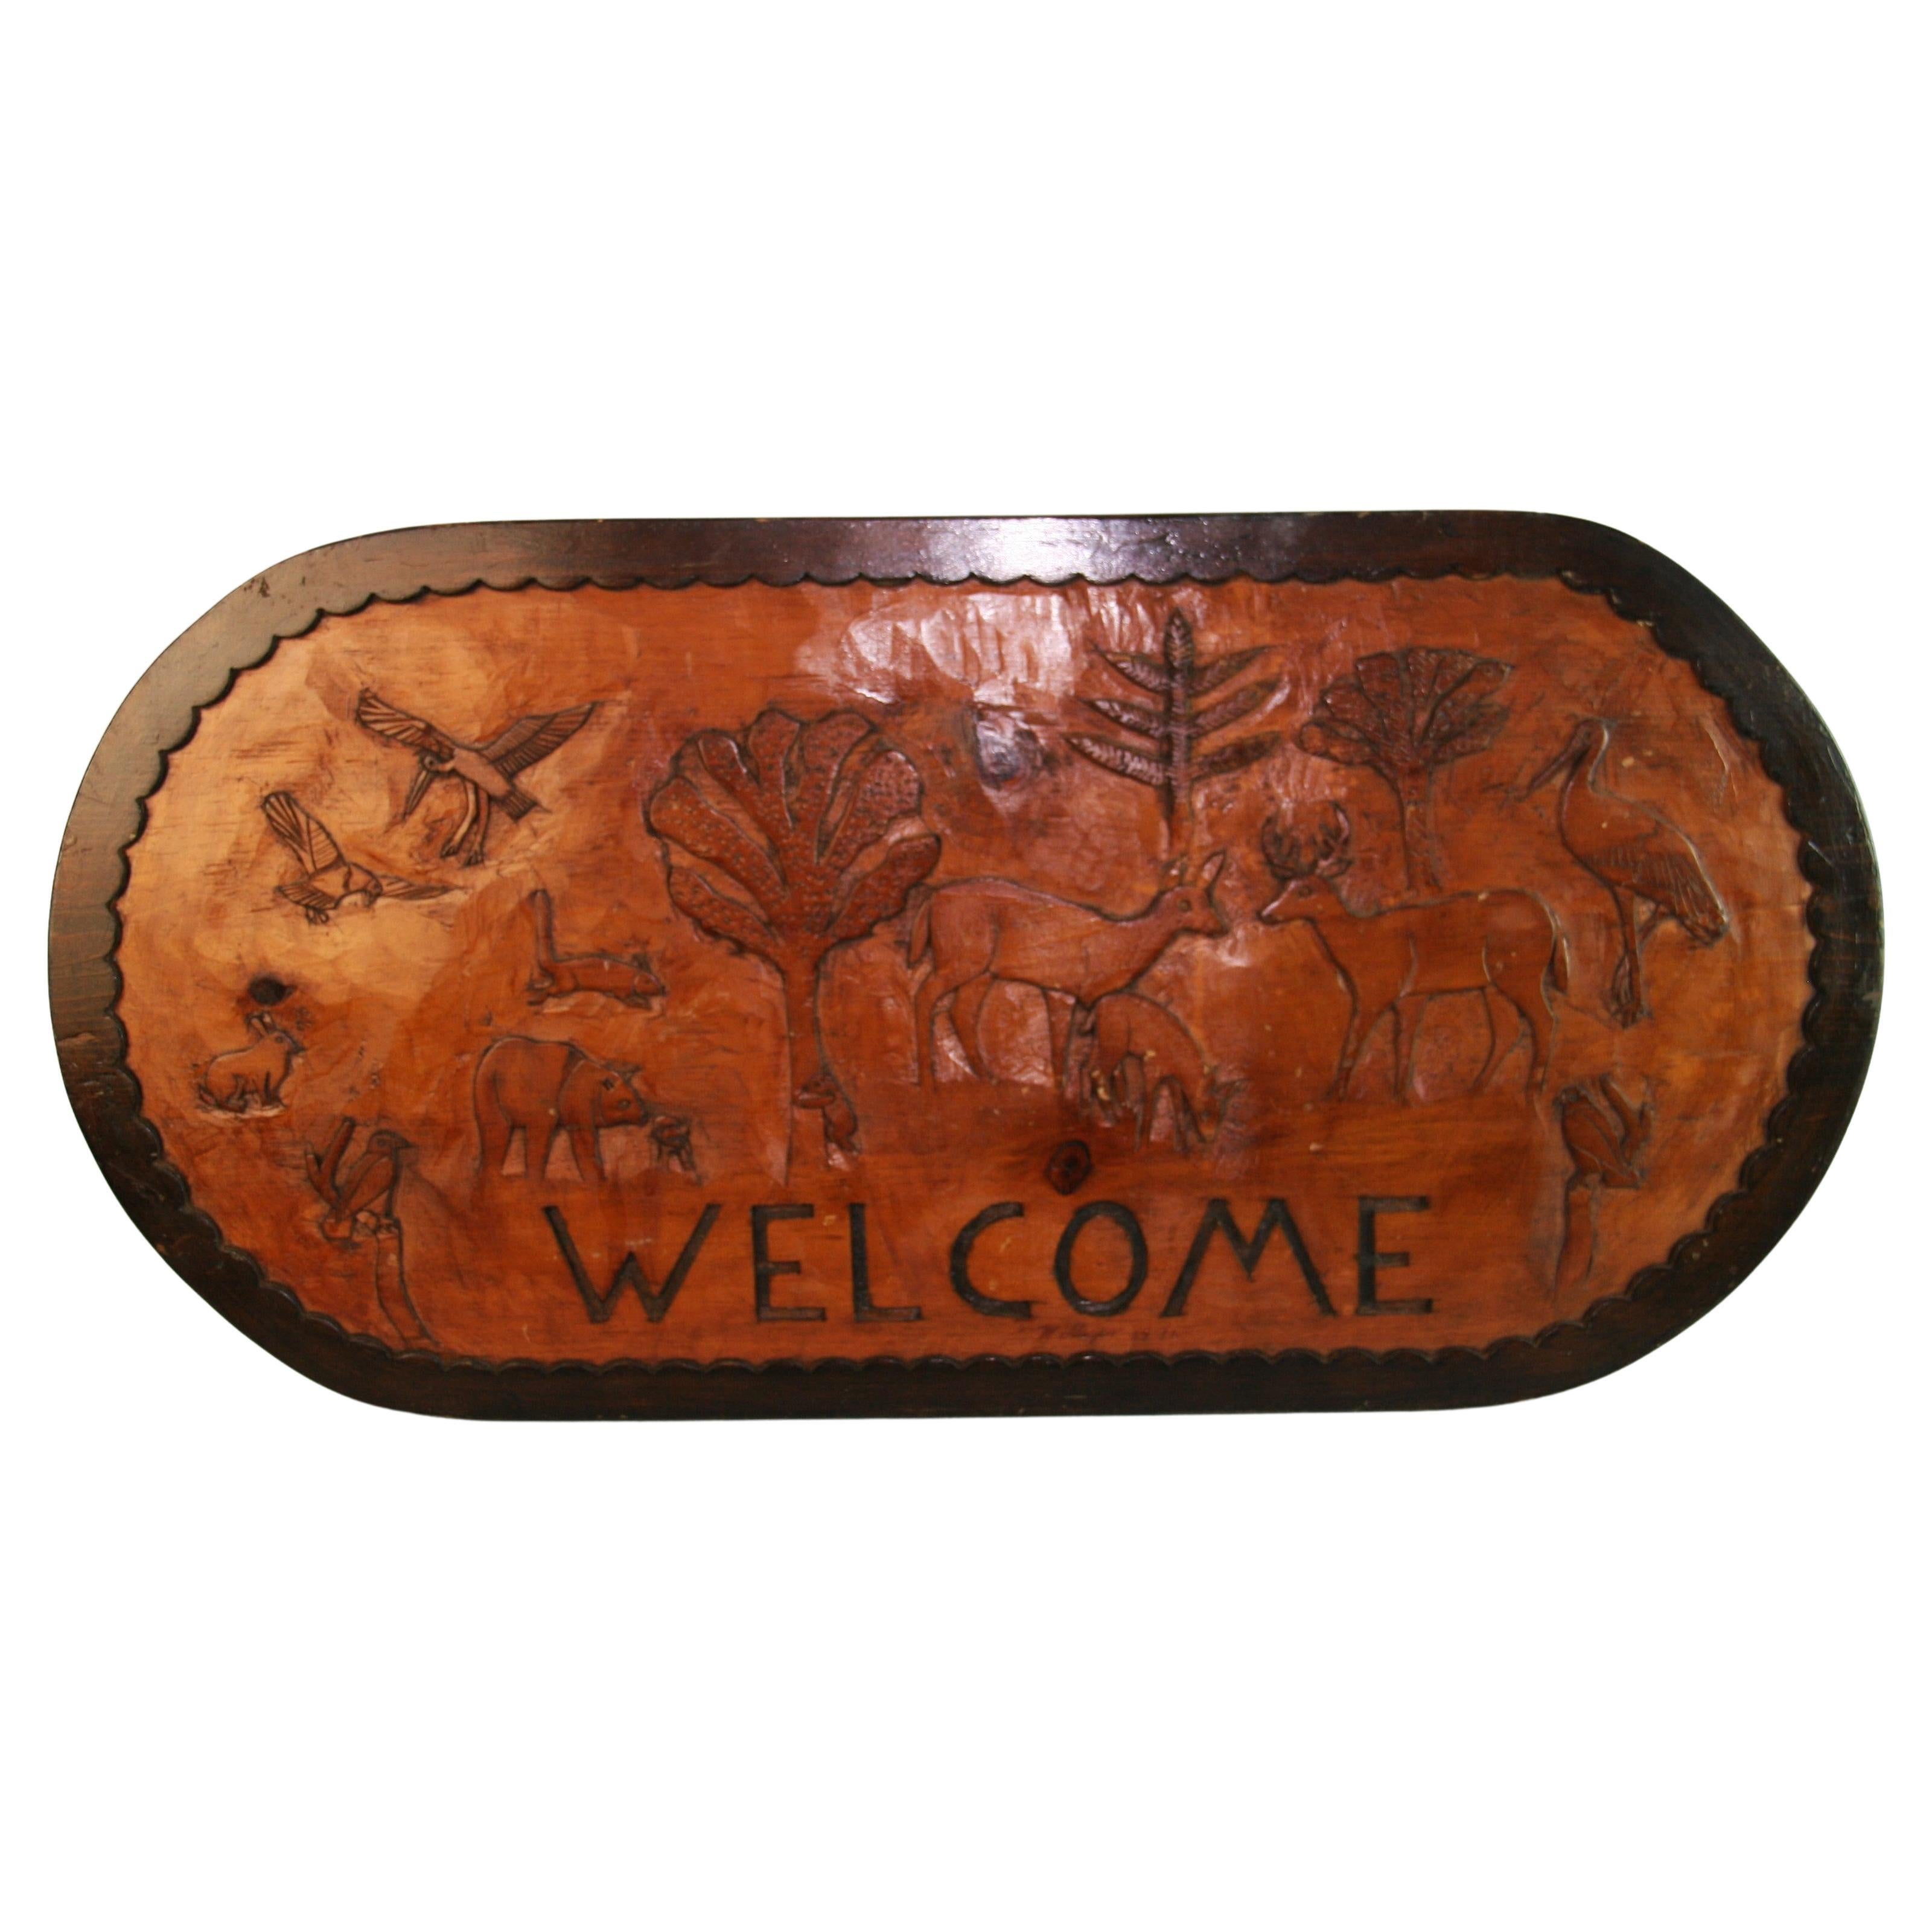 1273 Hand carved low relief welcome wood wall plaque depicting forest animals.
Signed on verso W.Meyer 1976.